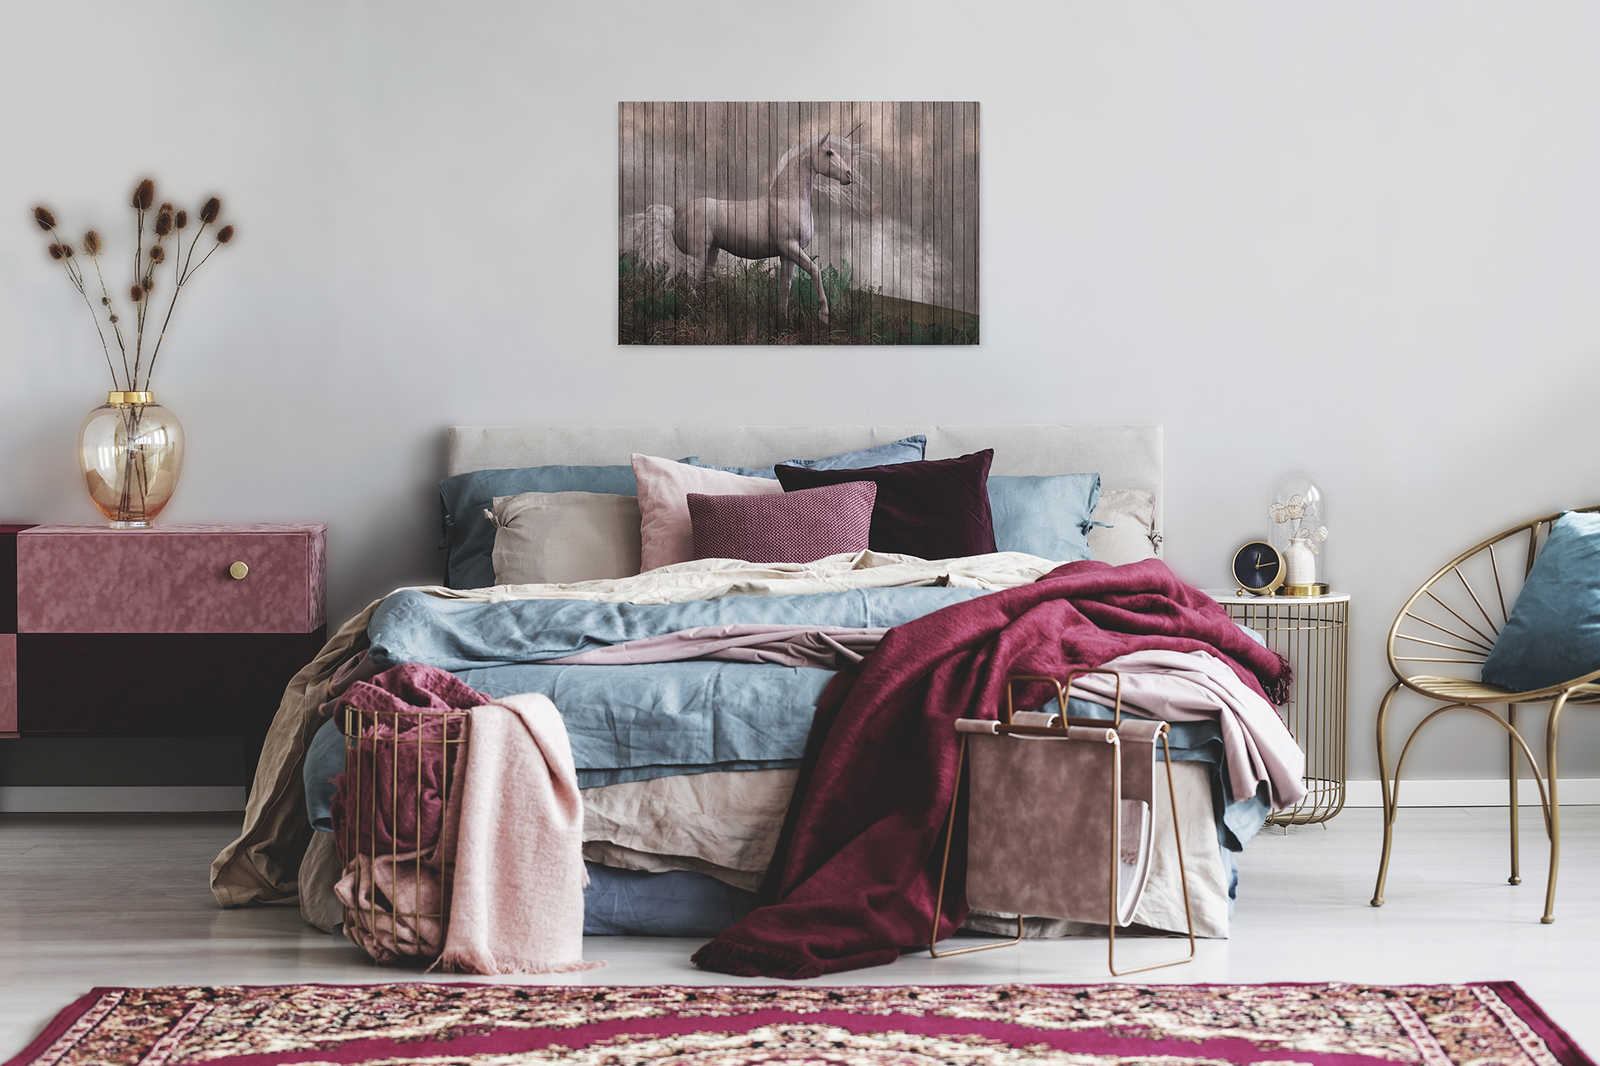             Fantasy 3 - Unicorn canvas picture with wooden board look - 0.90 m x 0.60 m
        